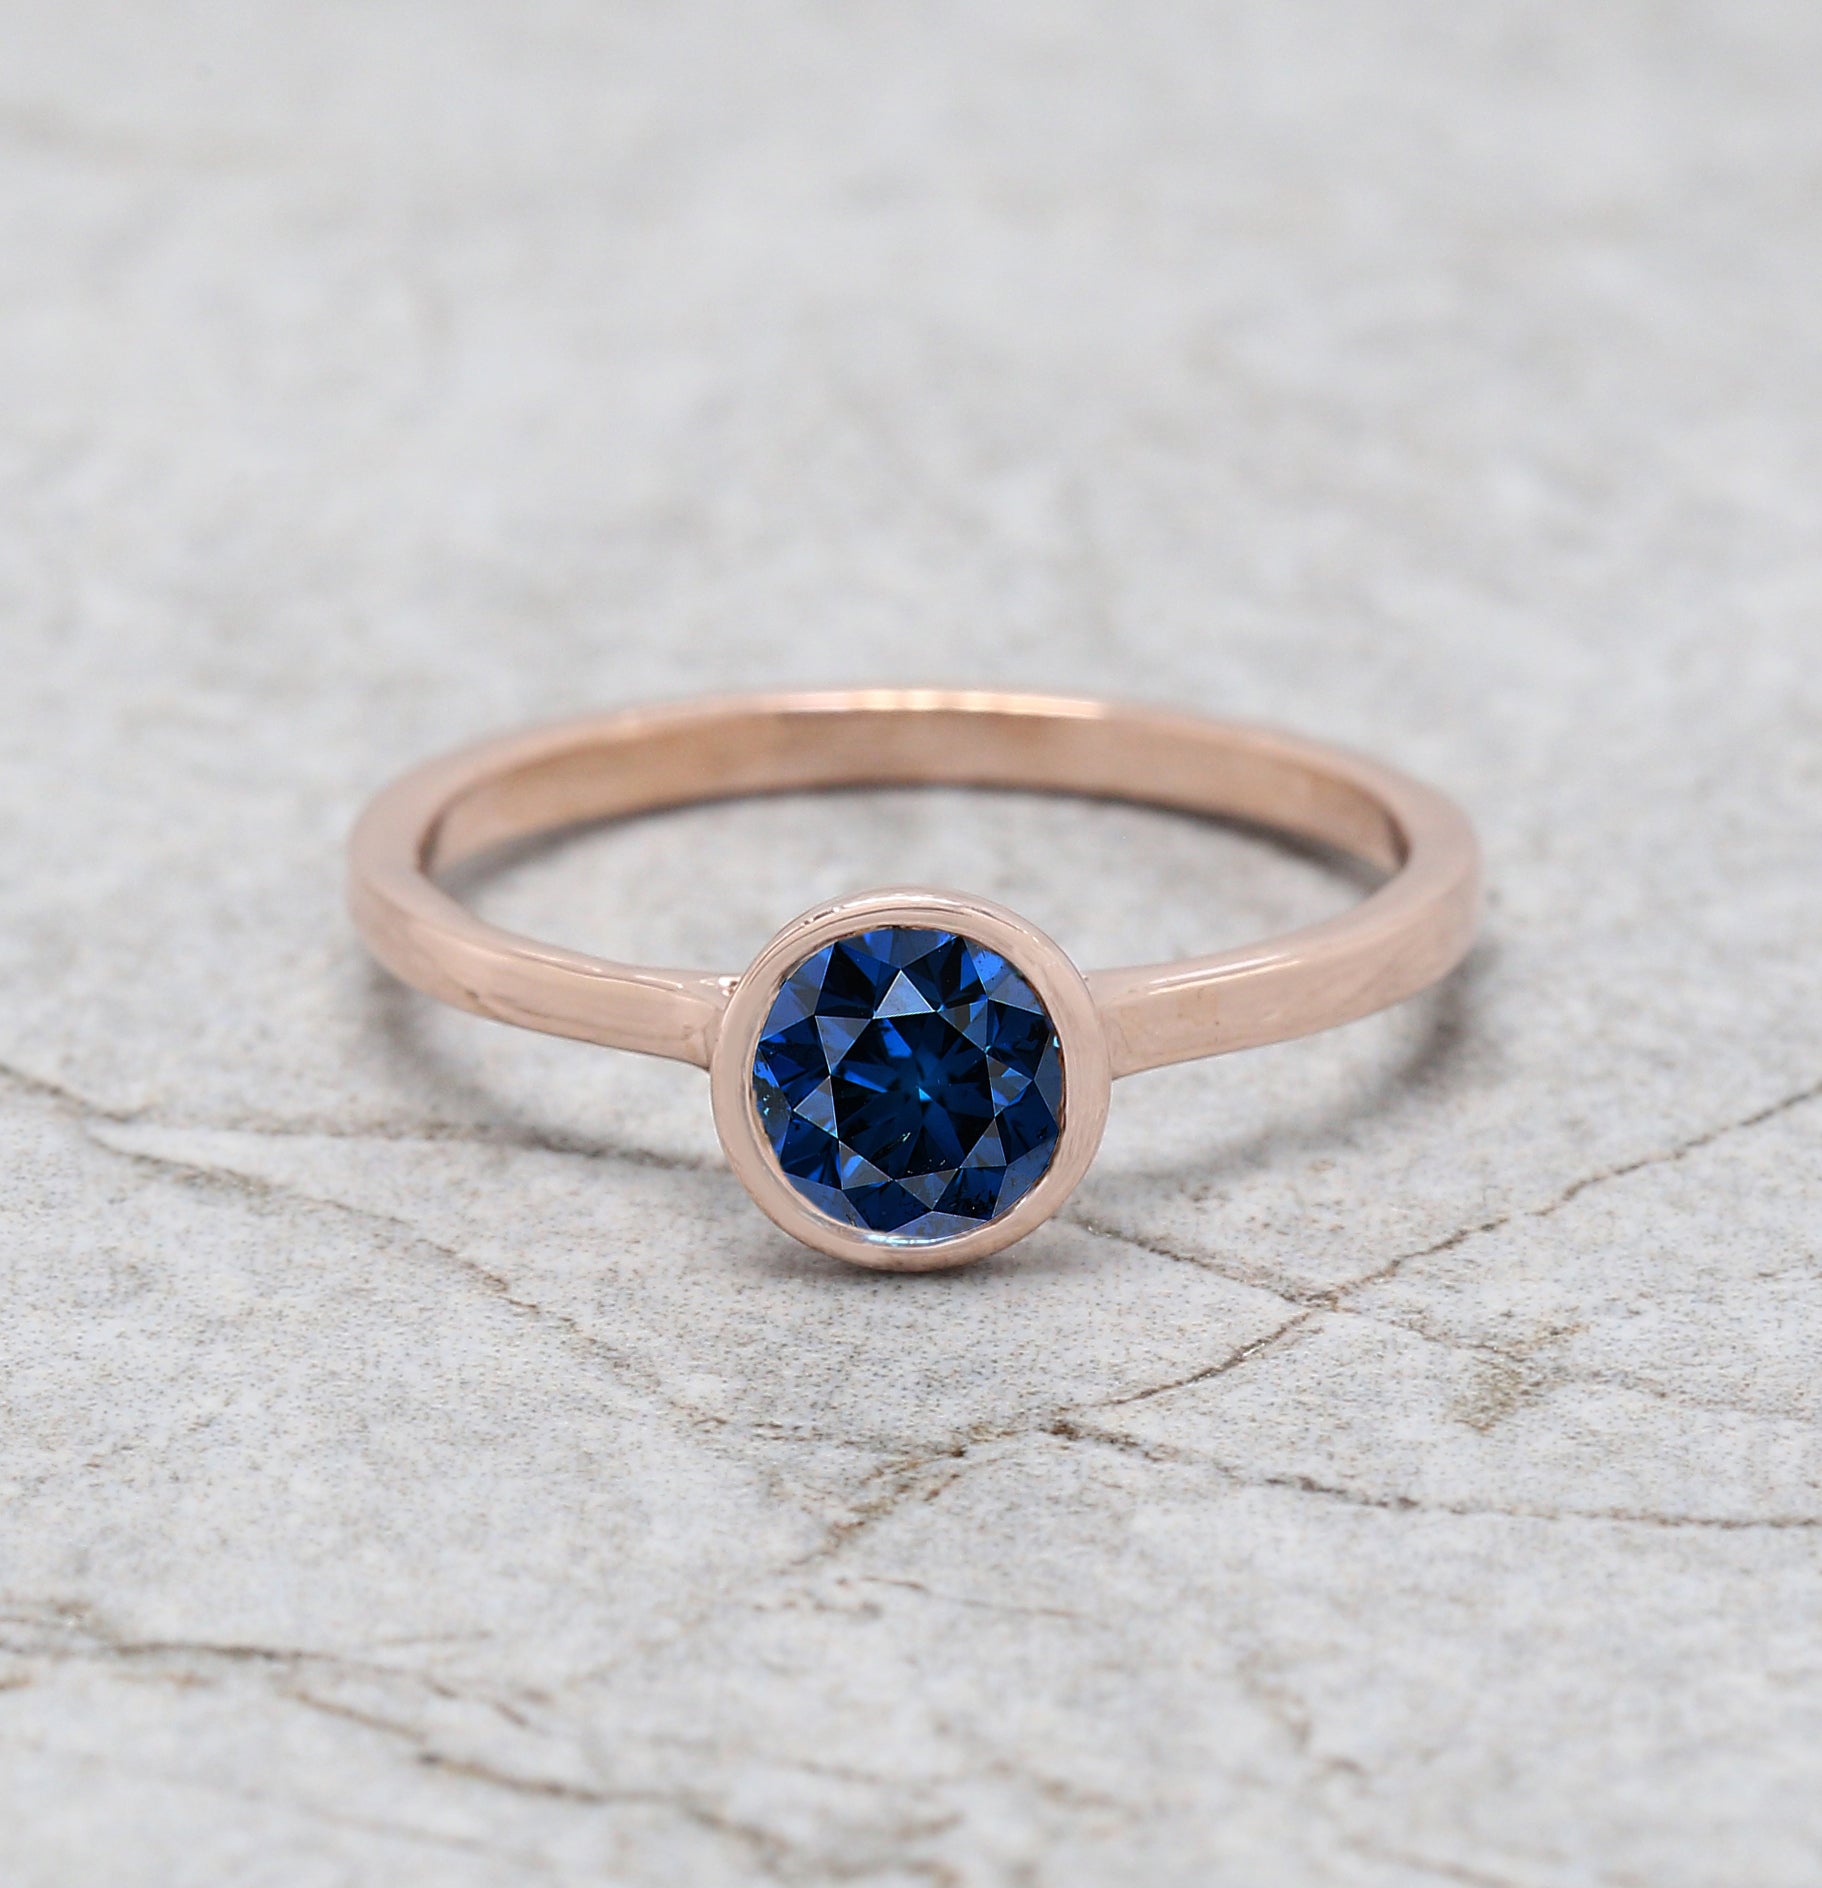 Round Shape Blue Color Diamond Ring 0.60 Ct 5.15 MM Round Cut Diamond Ring 14K Solid Rose Gold Silver Engagement Ring Gift For Her QL1659